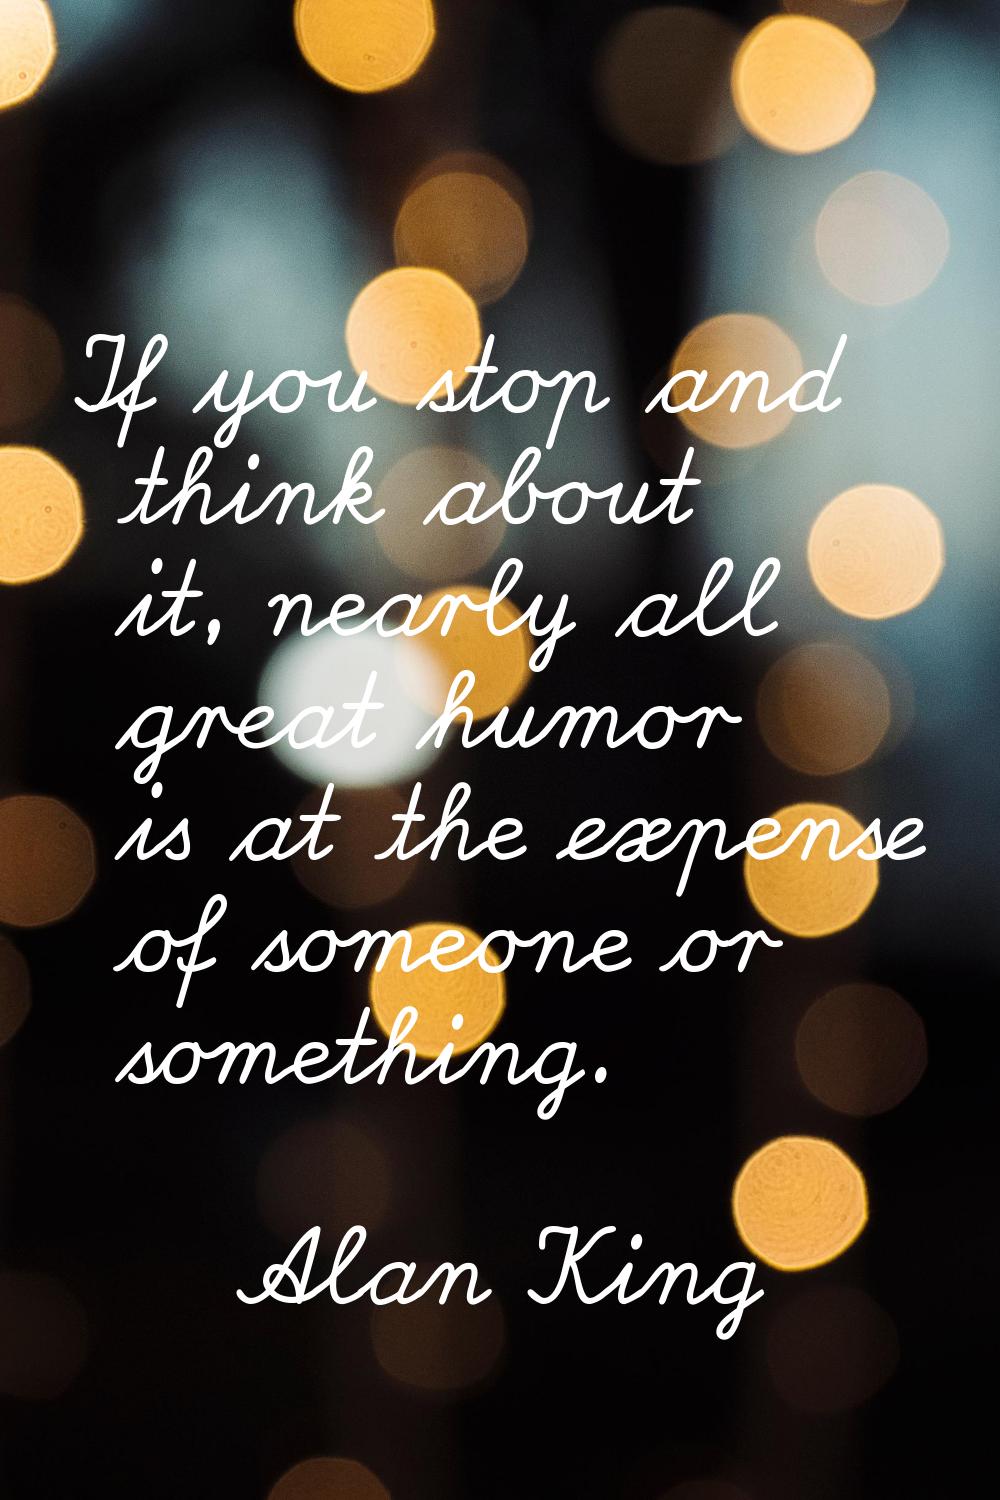 If you stop and think about it, nearly all great humor is at the expense of someone or something.